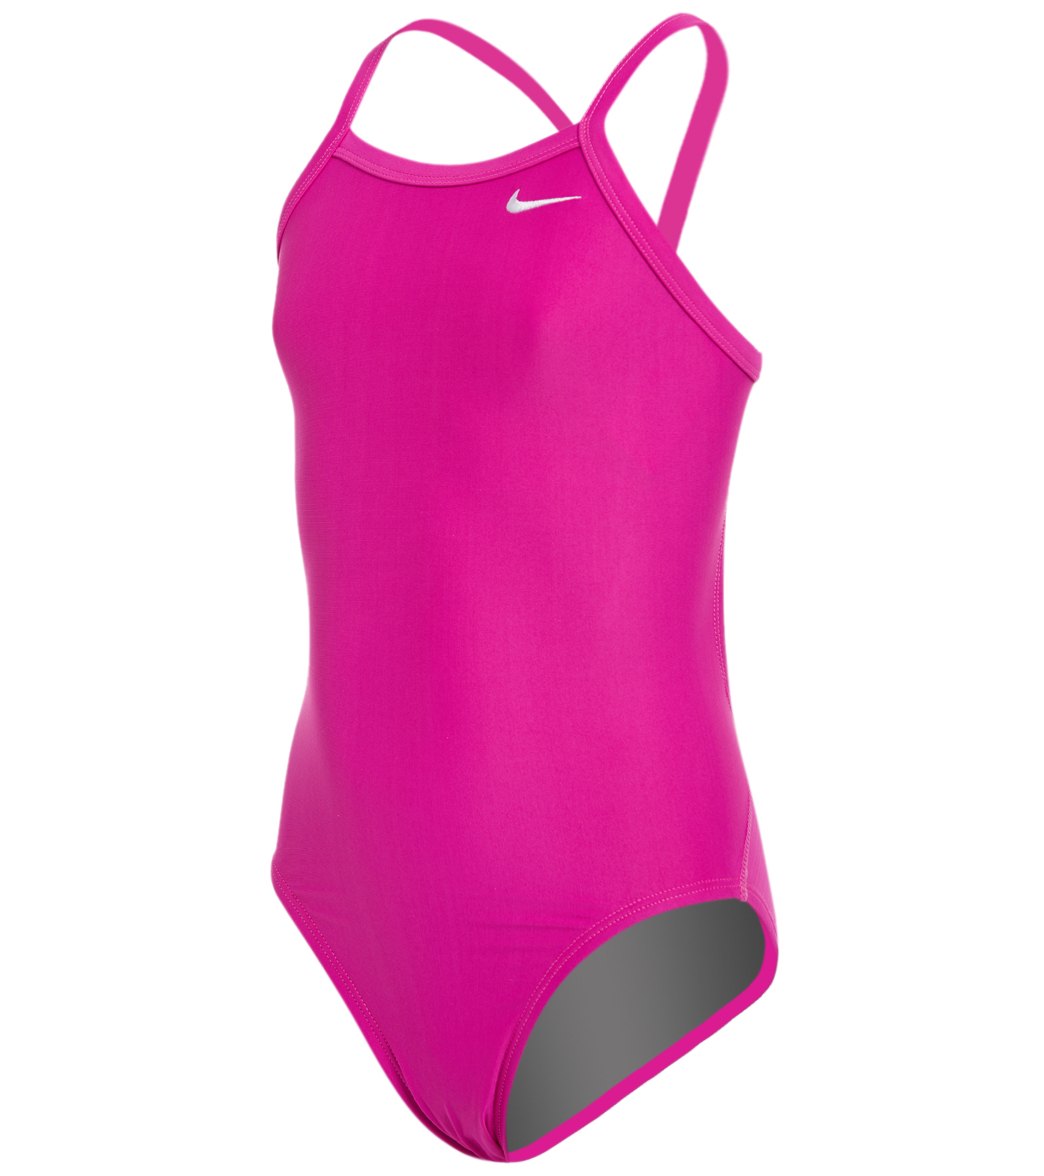 Nike Girls' Solid Racerback One Piece Swimsuit at SwimOutlet.com - Free ...